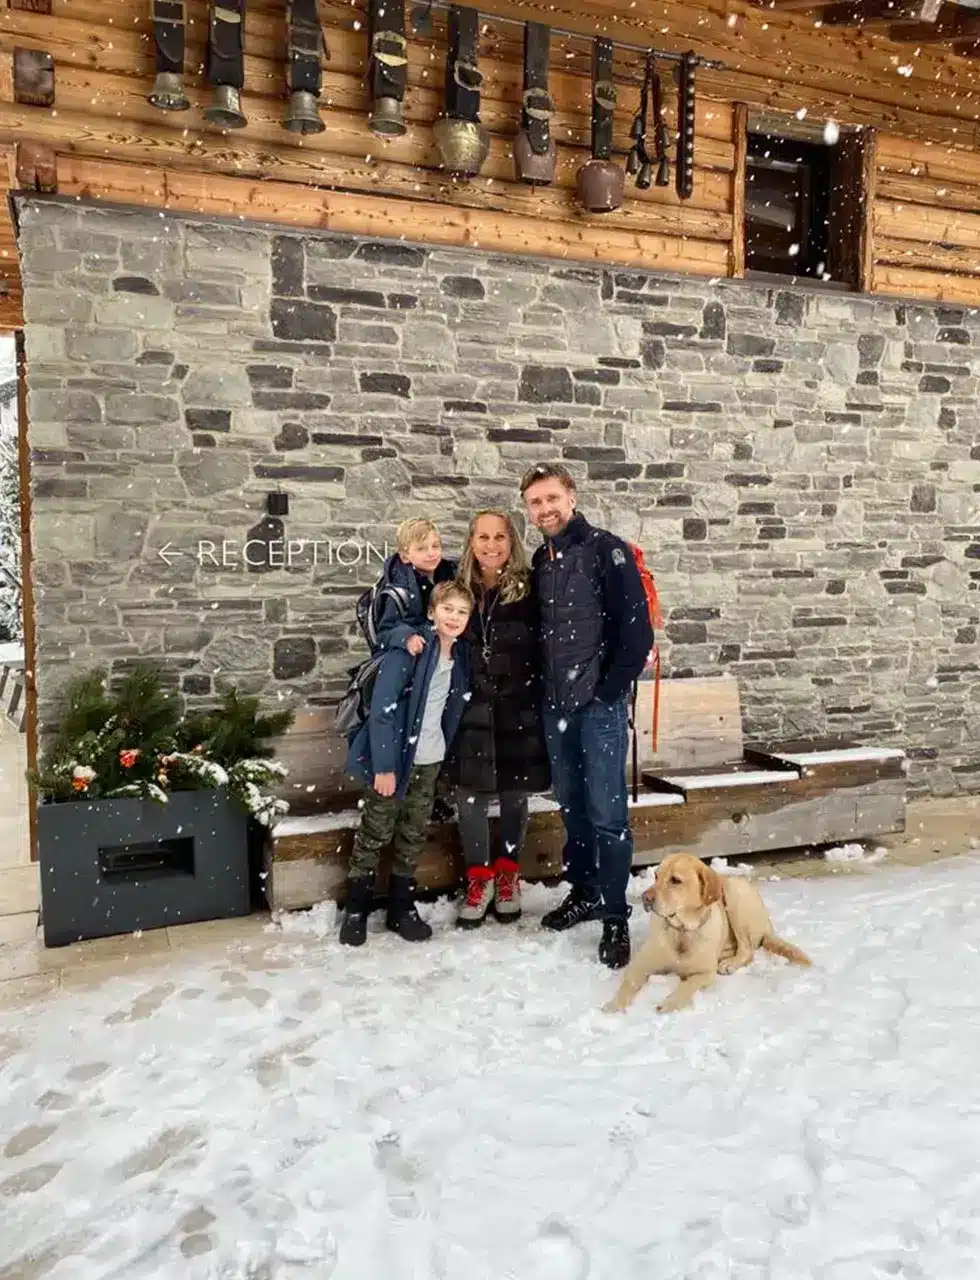 Katharine-Pooley-and-her-family-in-the-snow-aspect-ratio-0-0